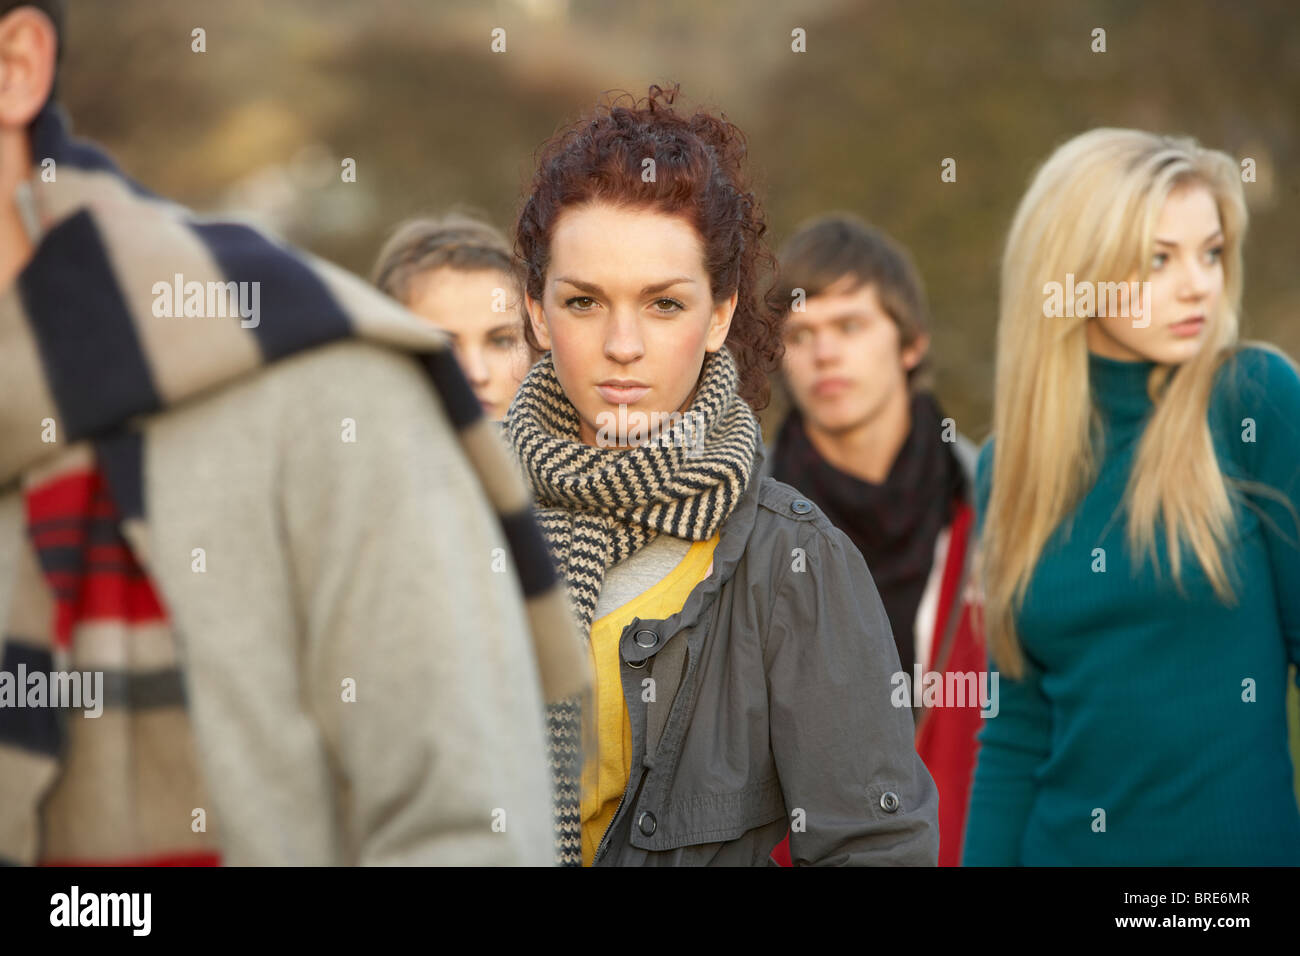 Teenage Girl Surrounded By Friends In Outdoor Autumn Landscape Stock Photo